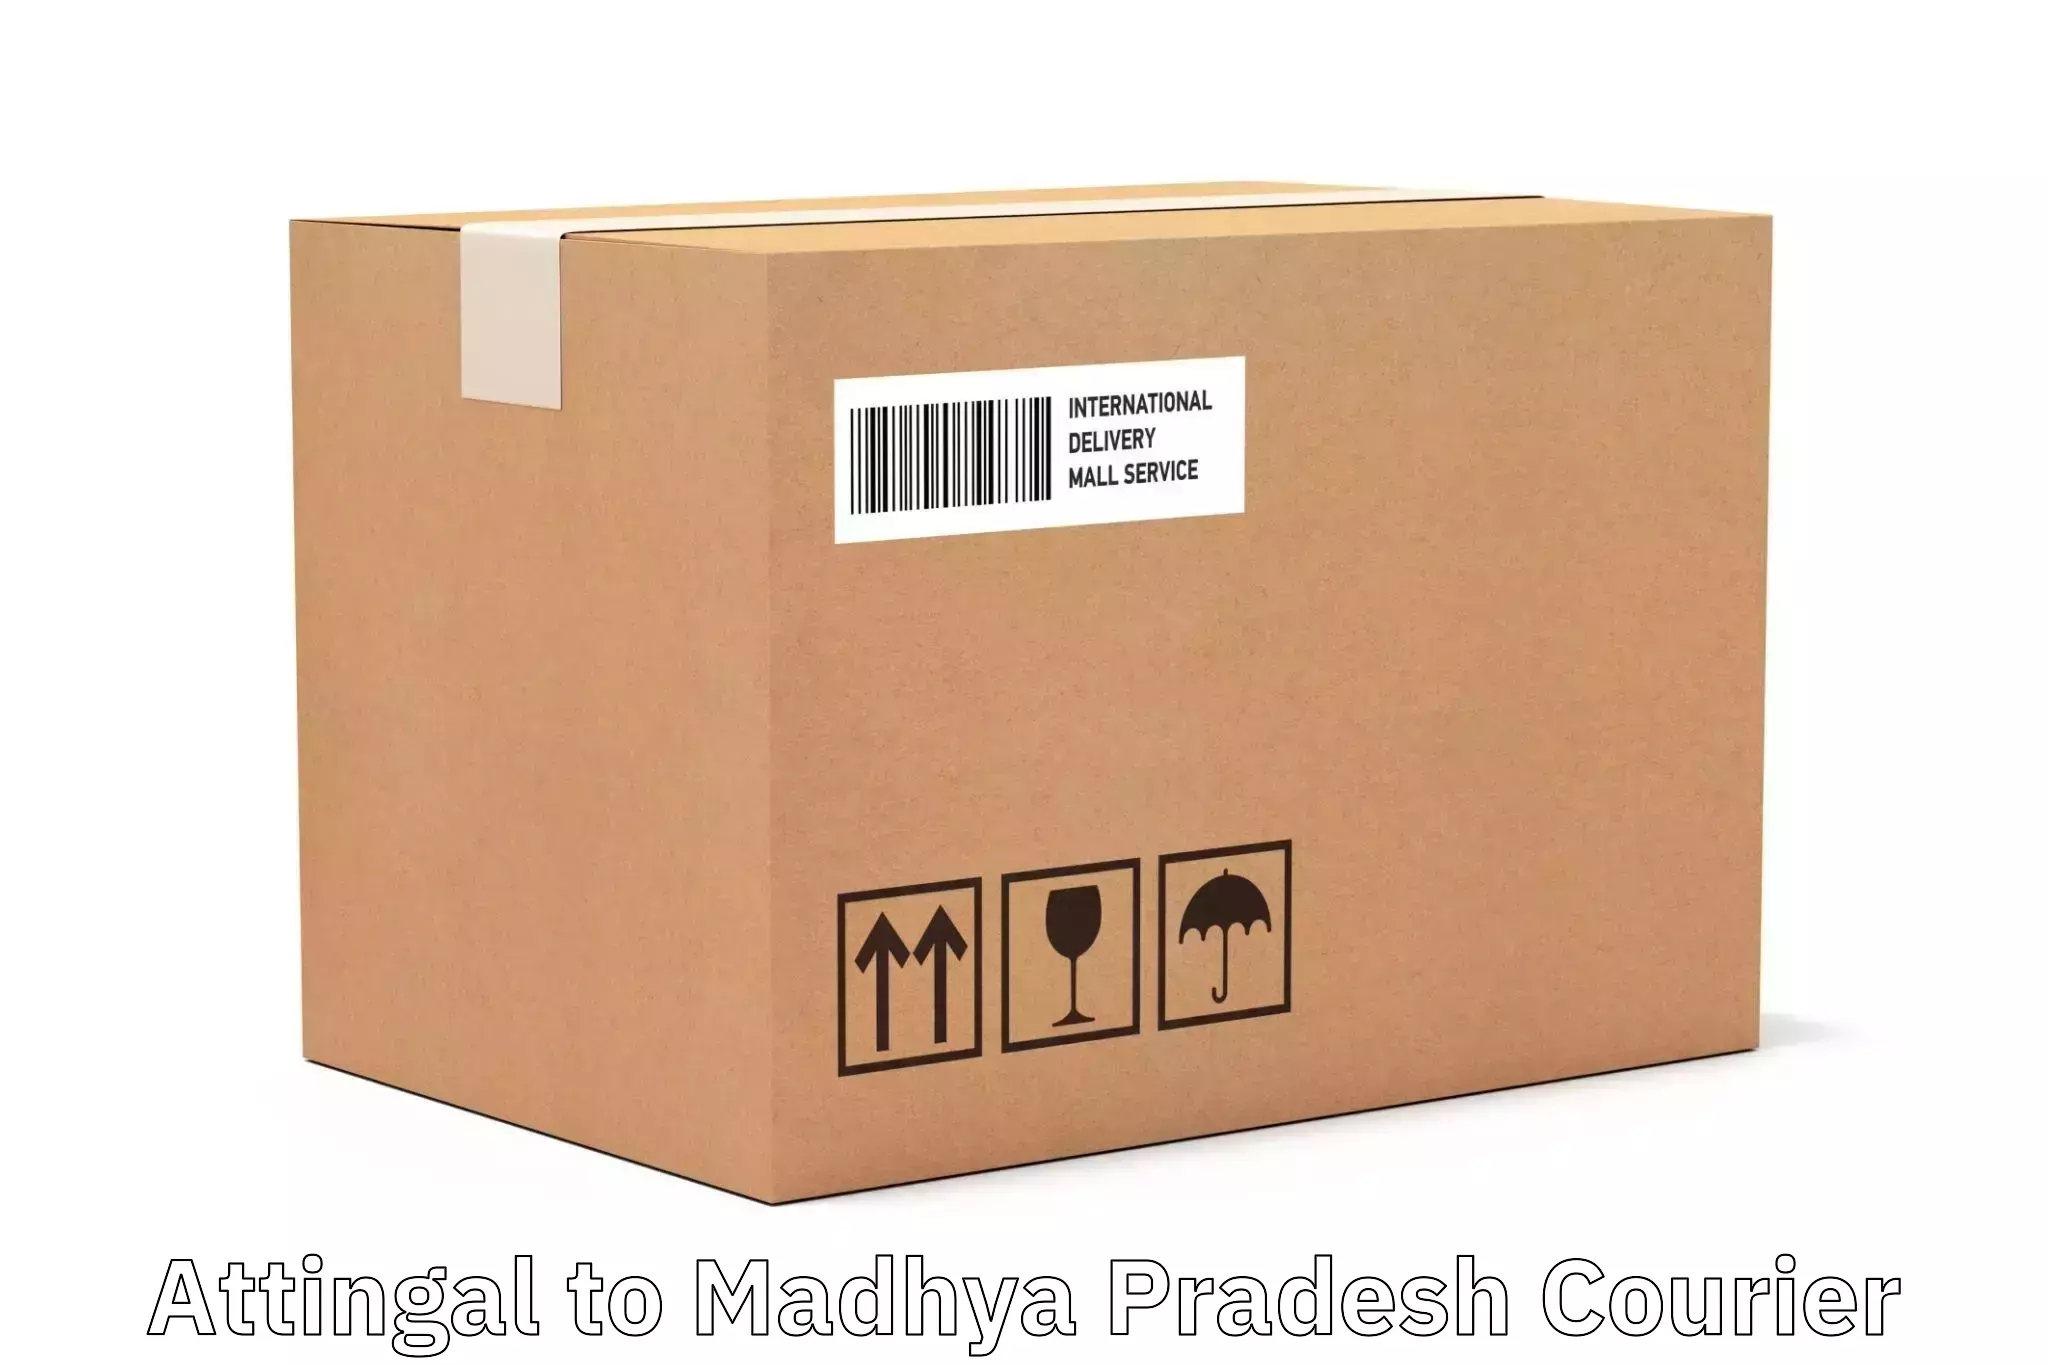 Express delivery capabilities in Attingal to Madhya Pradesh